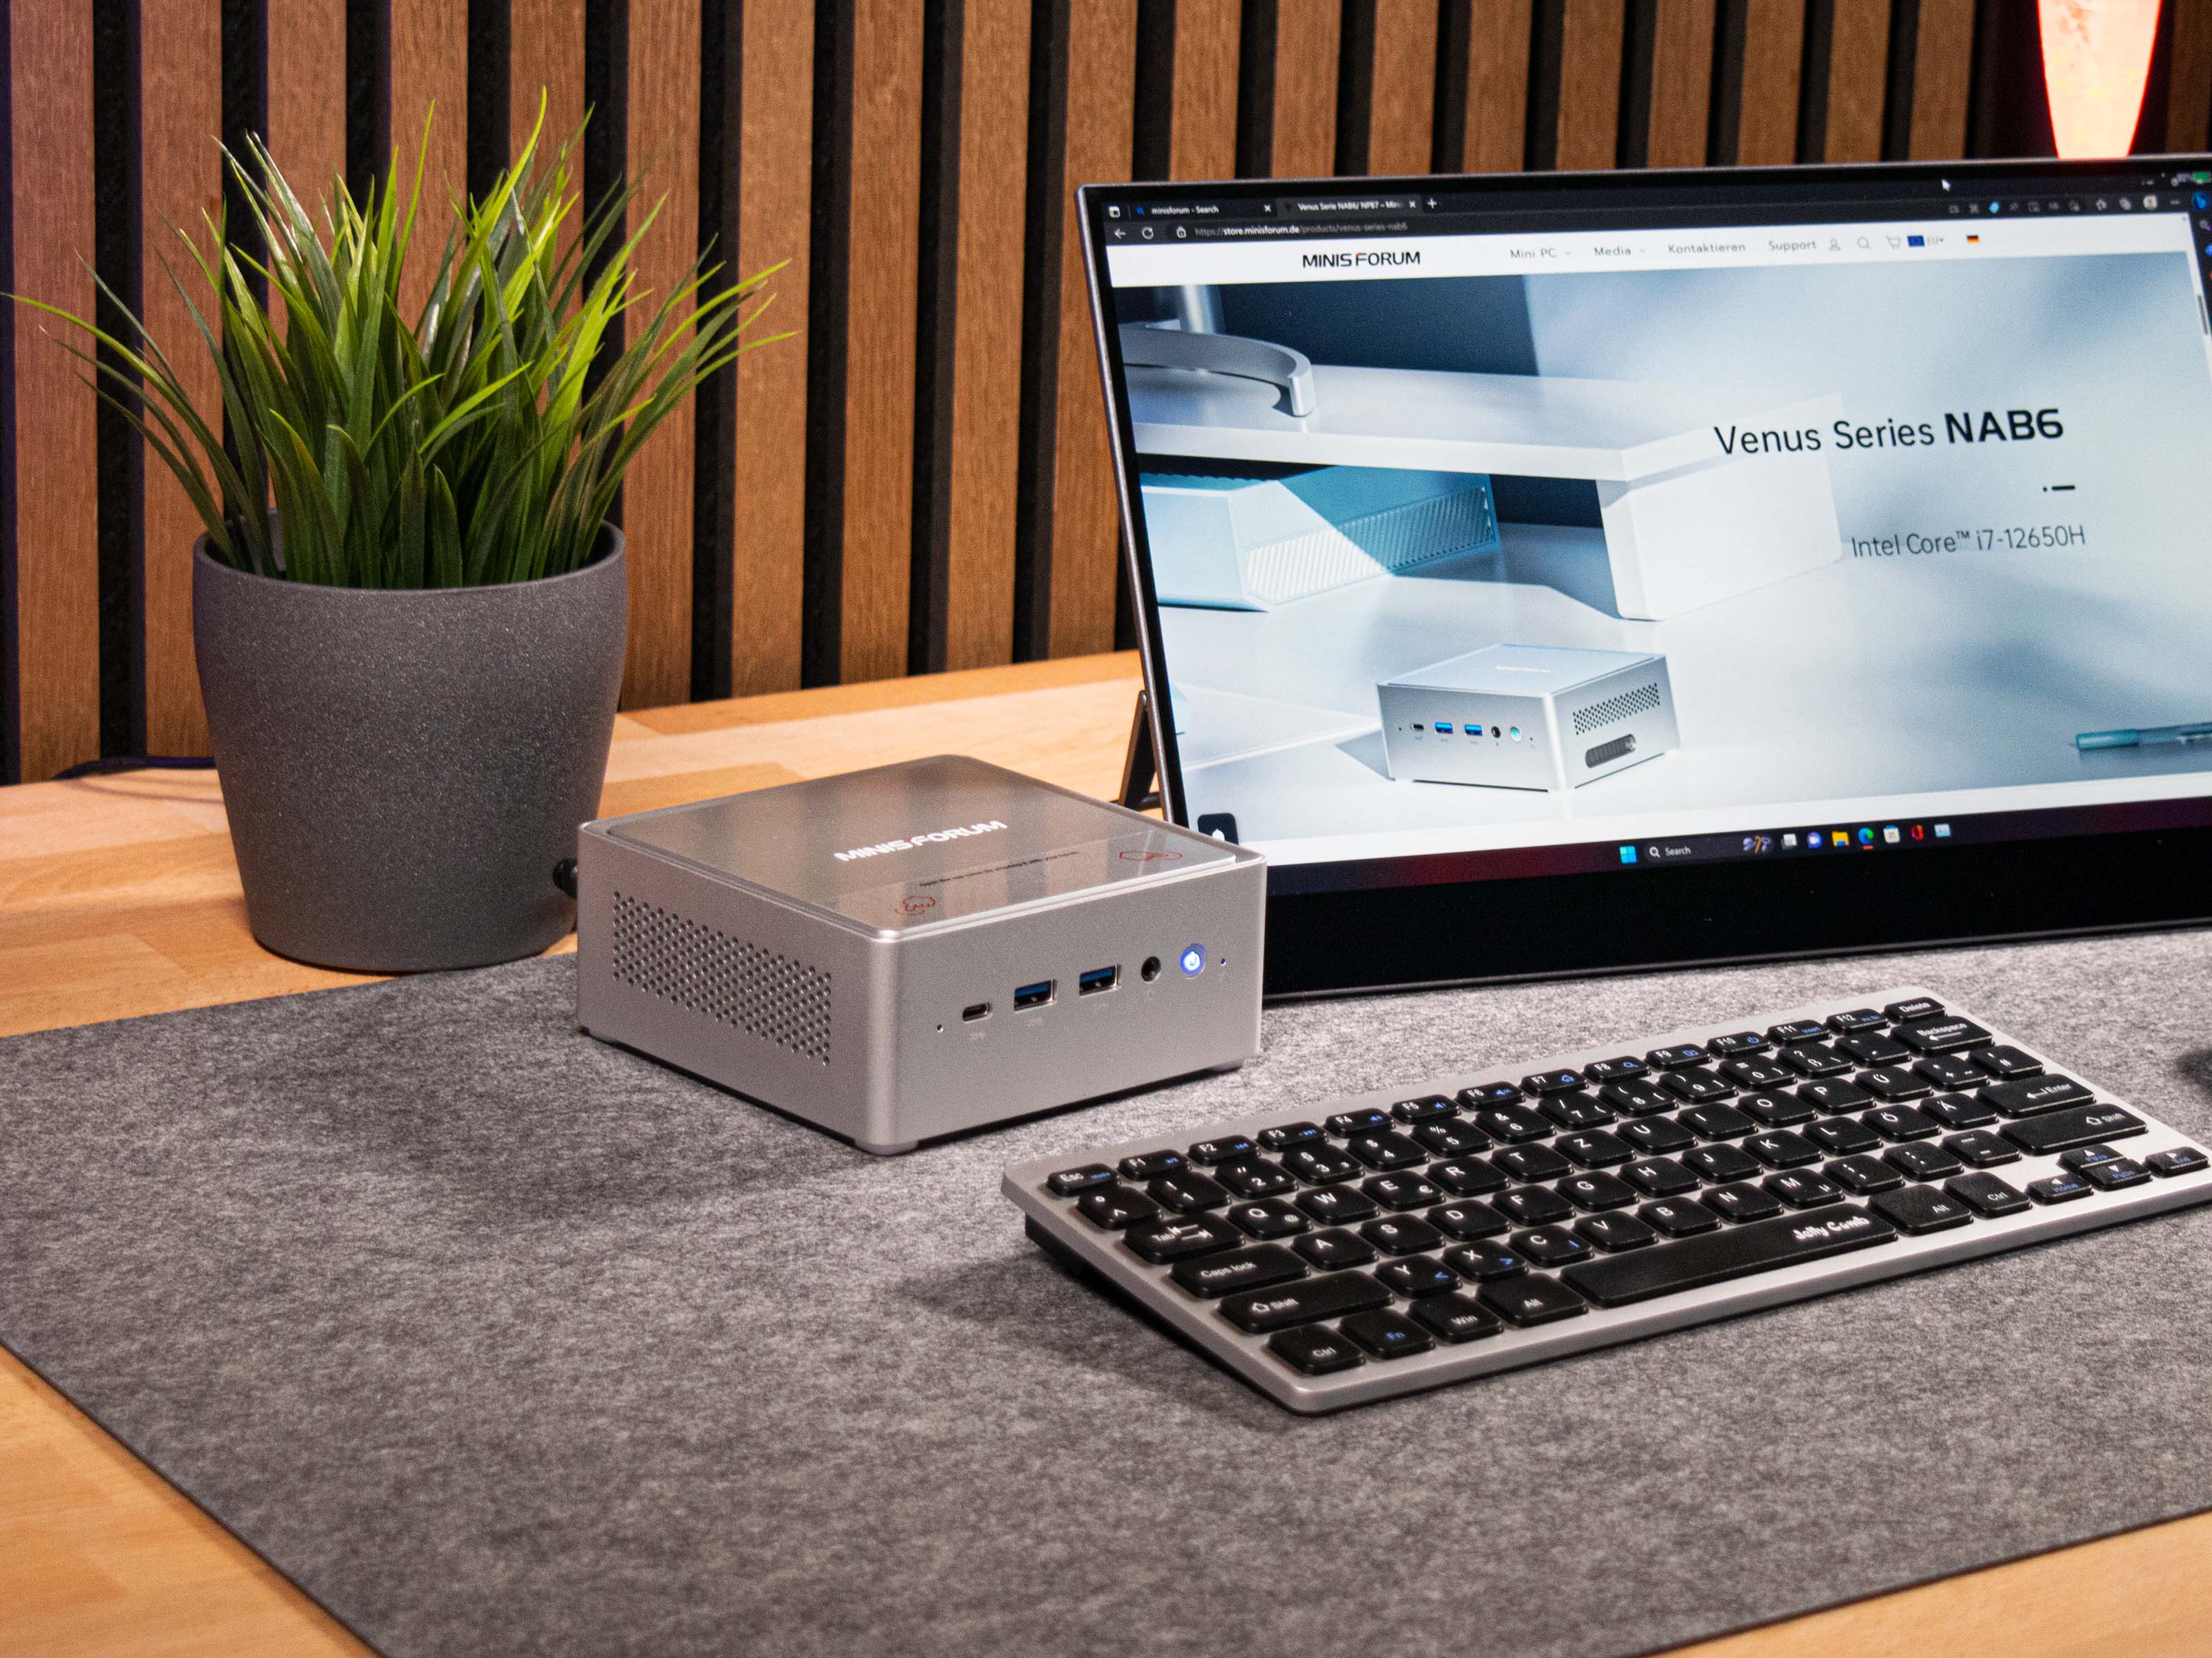 Minisforum Venus Series NAB6 review: The sleek mini PC with a fast Intel  Core i7-12650H and active SSD cooling! -  Reviews